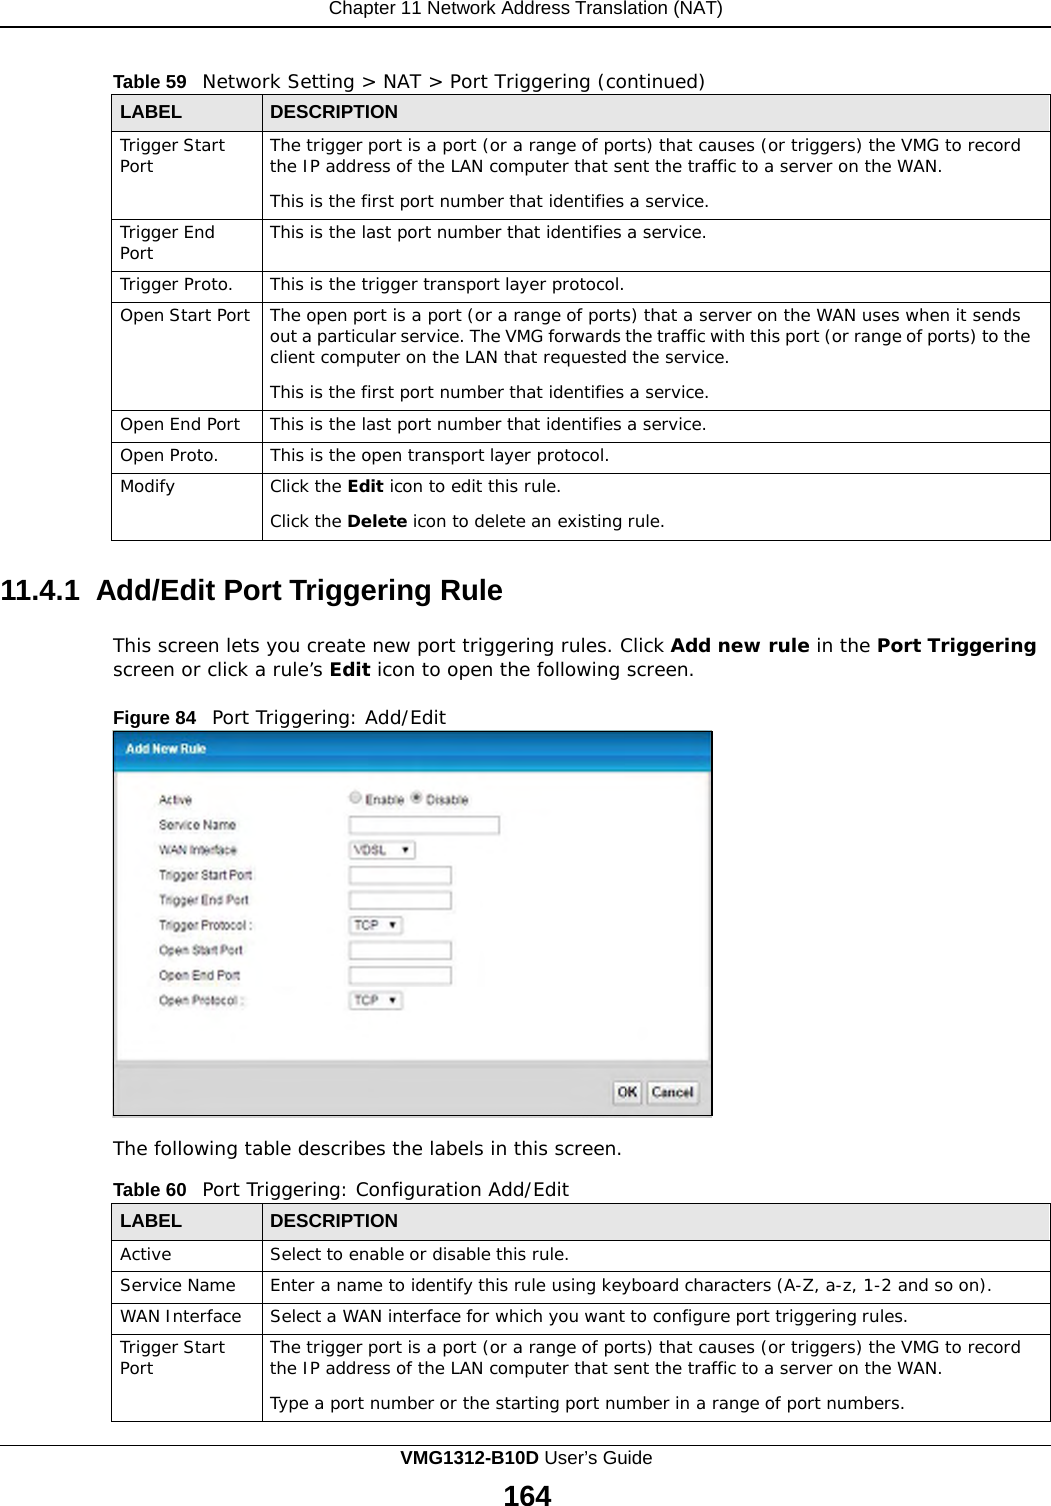 Chapter 11 Network Address Translation (NAT)      Table 59   Network Setting &gt; NAT &gt; Port Triggering (continued)  LABEL DESCRIPTION Trigger Start Port The trigger port is a port (or a range of ports) that causes (or triggers) the VMG to record the IP address of the LAN computer that sent the traffic to a server on the WAN.  This is the first port number that identifies a service. Trigger End Port This is the last port number that identifies a service. Trigger Proto. This is the trigger transport layer protocol. Open Start Port The open port is a port (or a range of ports) that a server on the WAN uses when it sends out a particular service. The VMG forwards the traffic with this port (or range of ports) to the client computer on the LAN that requested the service.  This is the first port number that identifies a service. Open End Port This is the last port number that identifies a service. Open Proto. This is the open transport layer protocol. Modify Click the Edit icon to edit this rule.  Click the Delete icon to delete an existing rule.  11.4.1 Add/Edit Port Triggering Rule  This screen lets you create new port triggering rules. Click Add new rule in the Port Triggering screen or click a rule’s Edit icon to open the following screen.  Figure 84   Port Triggering: Add/Edit                     The following table describes the labels in this screen.  Table 60   Port Triggering: Configuration Add/Edit  LABEL DESCRIPTION Active Select to enable or disable this rule. Service Name Enter a name to identify this rule using keyboard characters (A-Z, a-z, 1-2 and so on). WAN Interface Select a WAN interface for which you want to configure port triggering rules. Trigger Start Port The trigger port is a port (or a range of ports) that causes (or triggers) the VMG to record the IP address of the LAN computer that sent the traffic to a server on the WAN.  Type a port number or the starting port number in a range of port numbers. VMG1312-B10D User’s Guide 164  